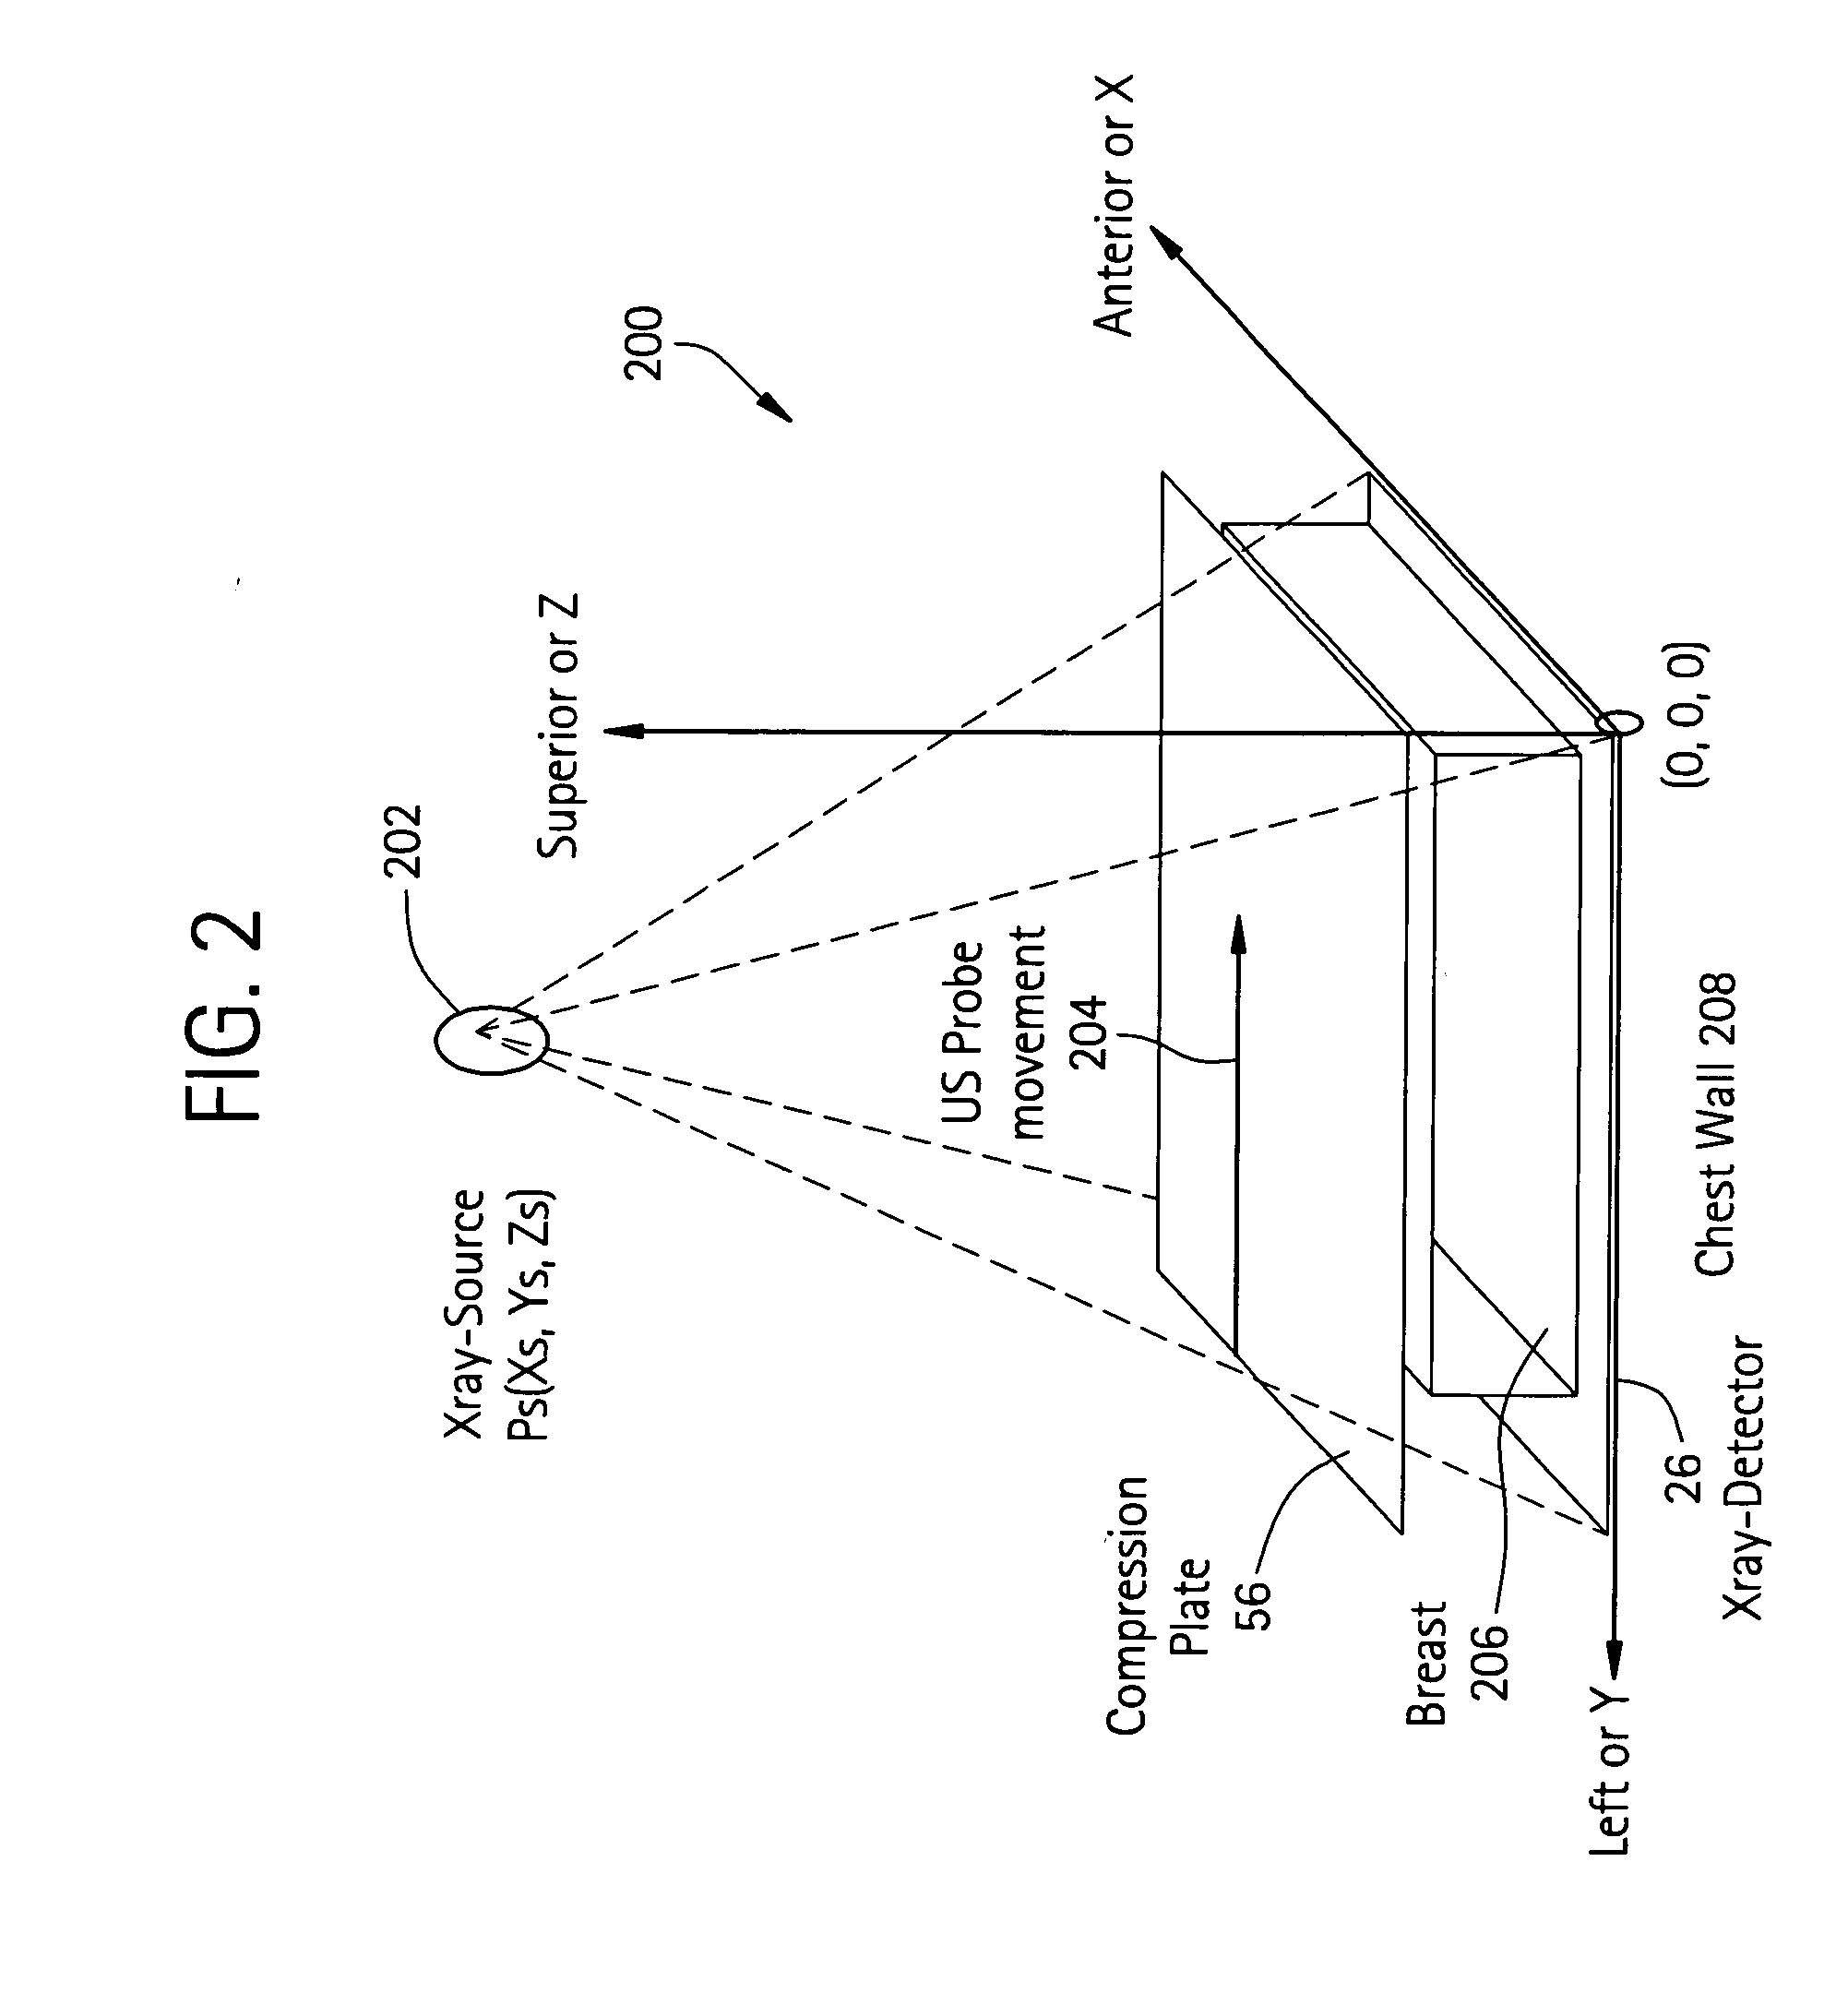 Method, system and computer program product for multi-modality registration using virtual cursors